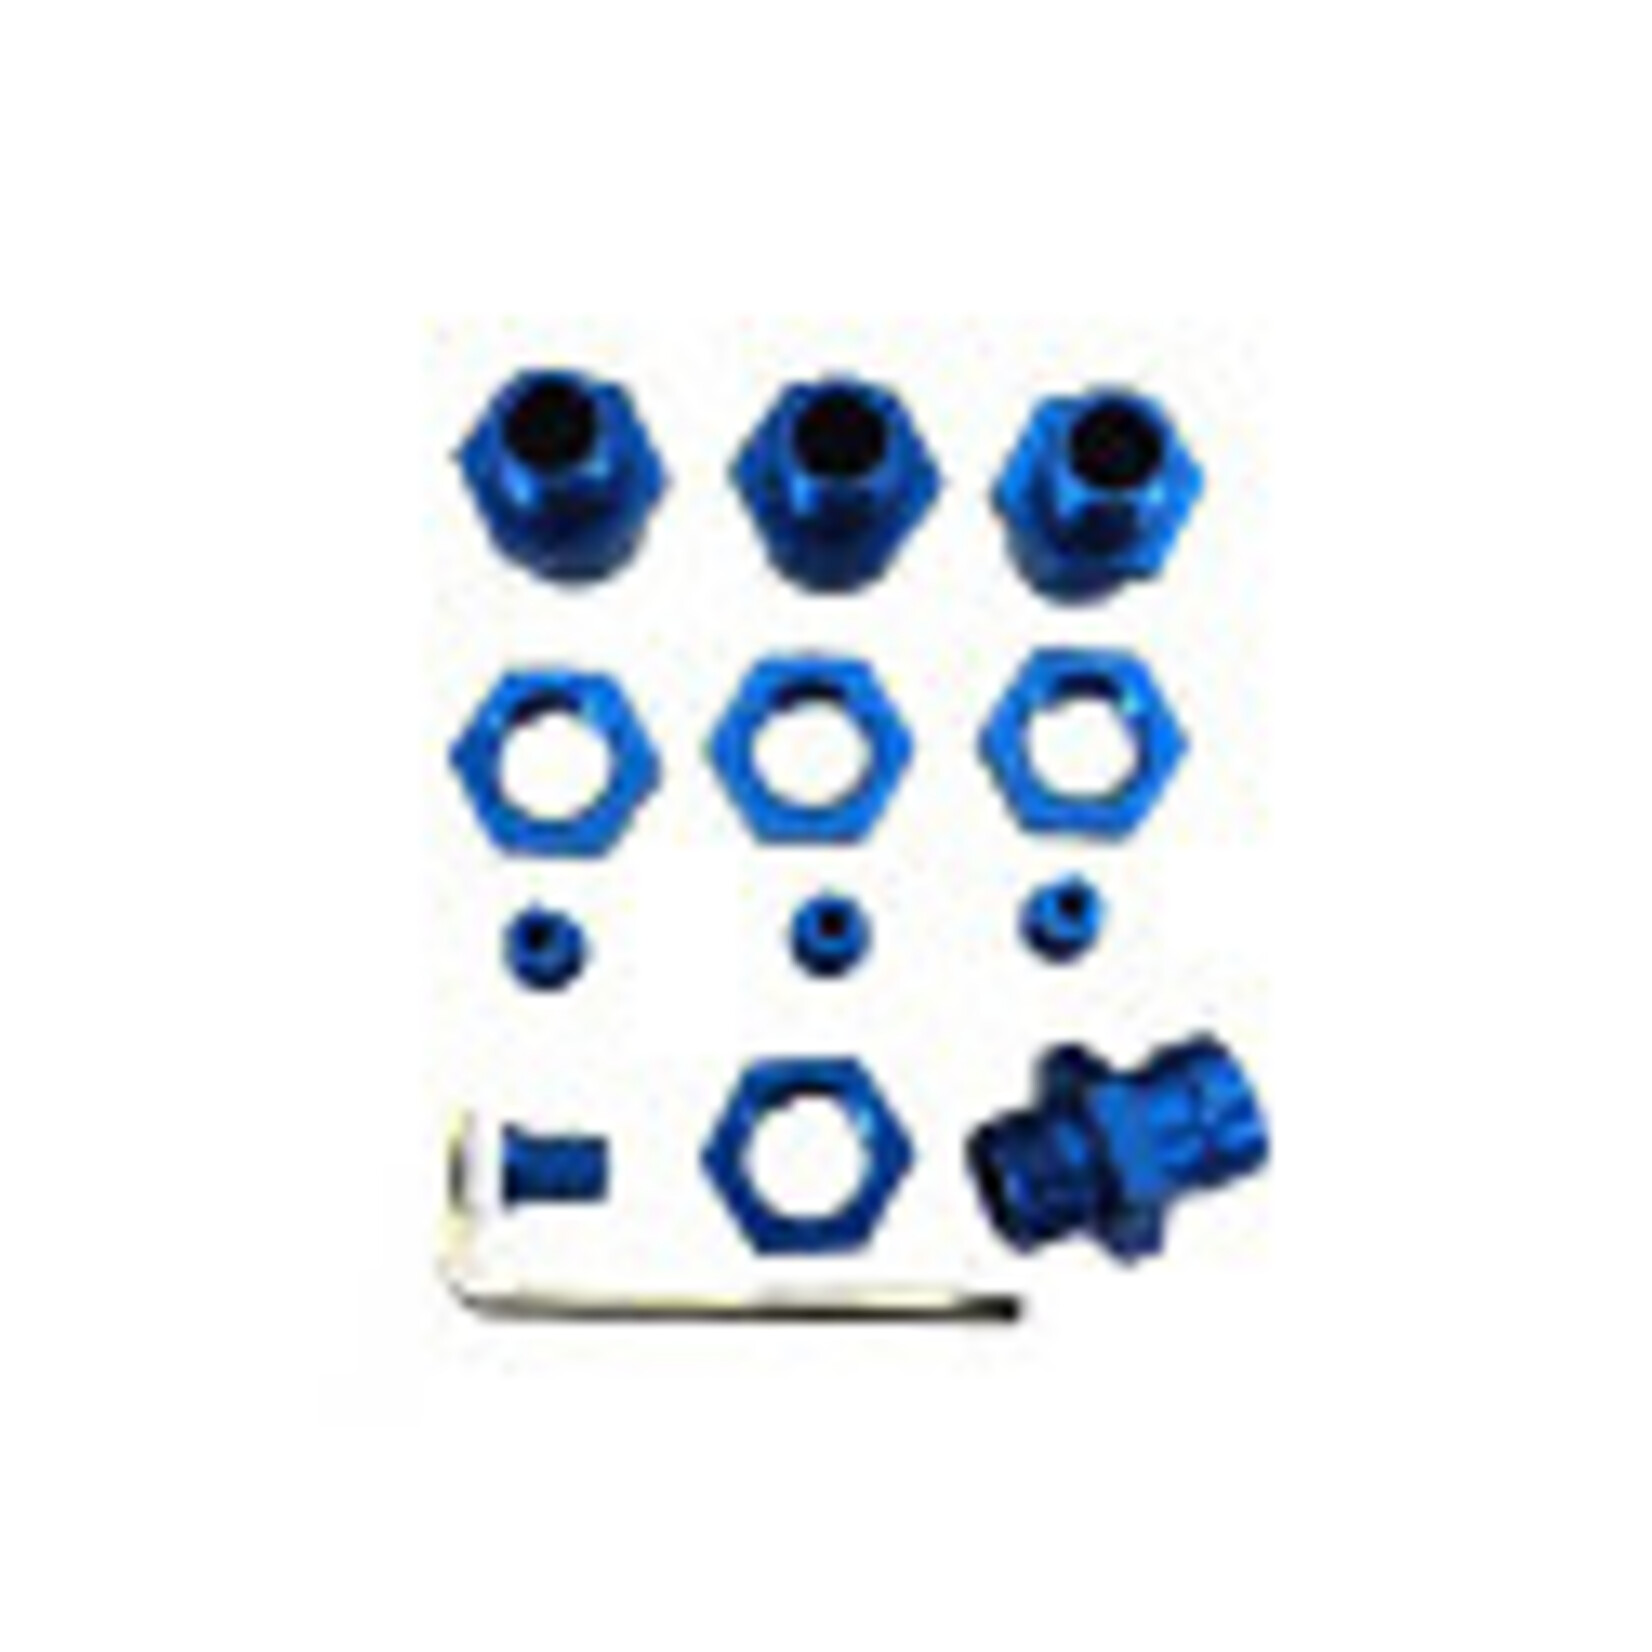 ST Racing Concepts Aluminum 17mm Hex Conversion Kit, Blue, for Traxxas Slash / Rally / Stampede / Hoss